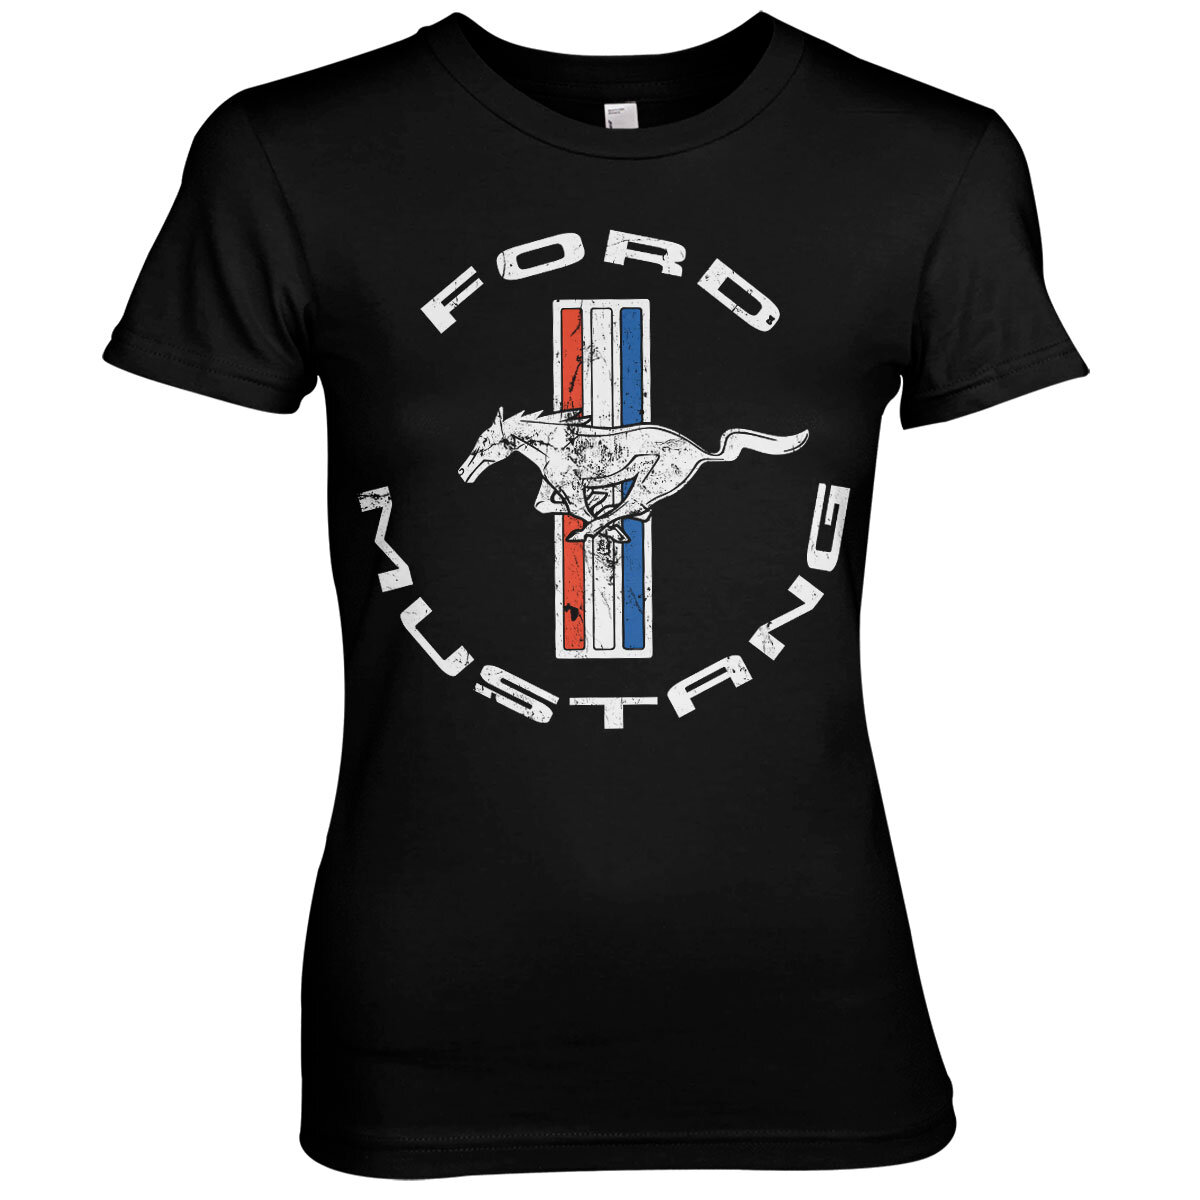 Ford Mustang Girly Tee